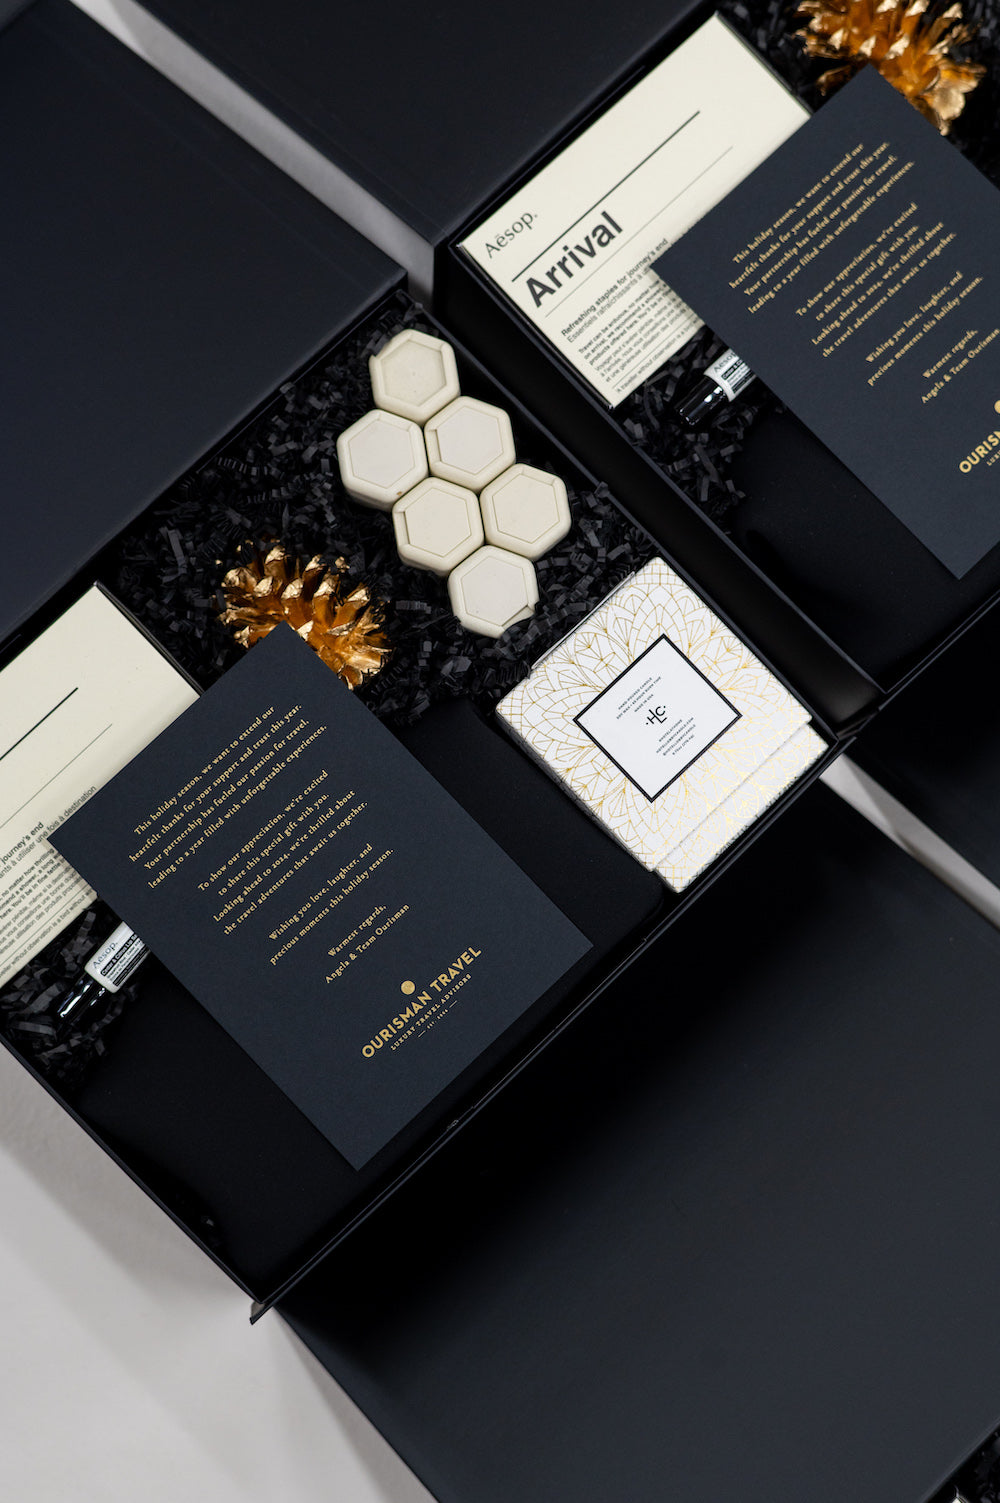 Luxury Travel-Inspired Holiday Gifts for Travel Agency, Black, White & Gold by Marigold & Grey